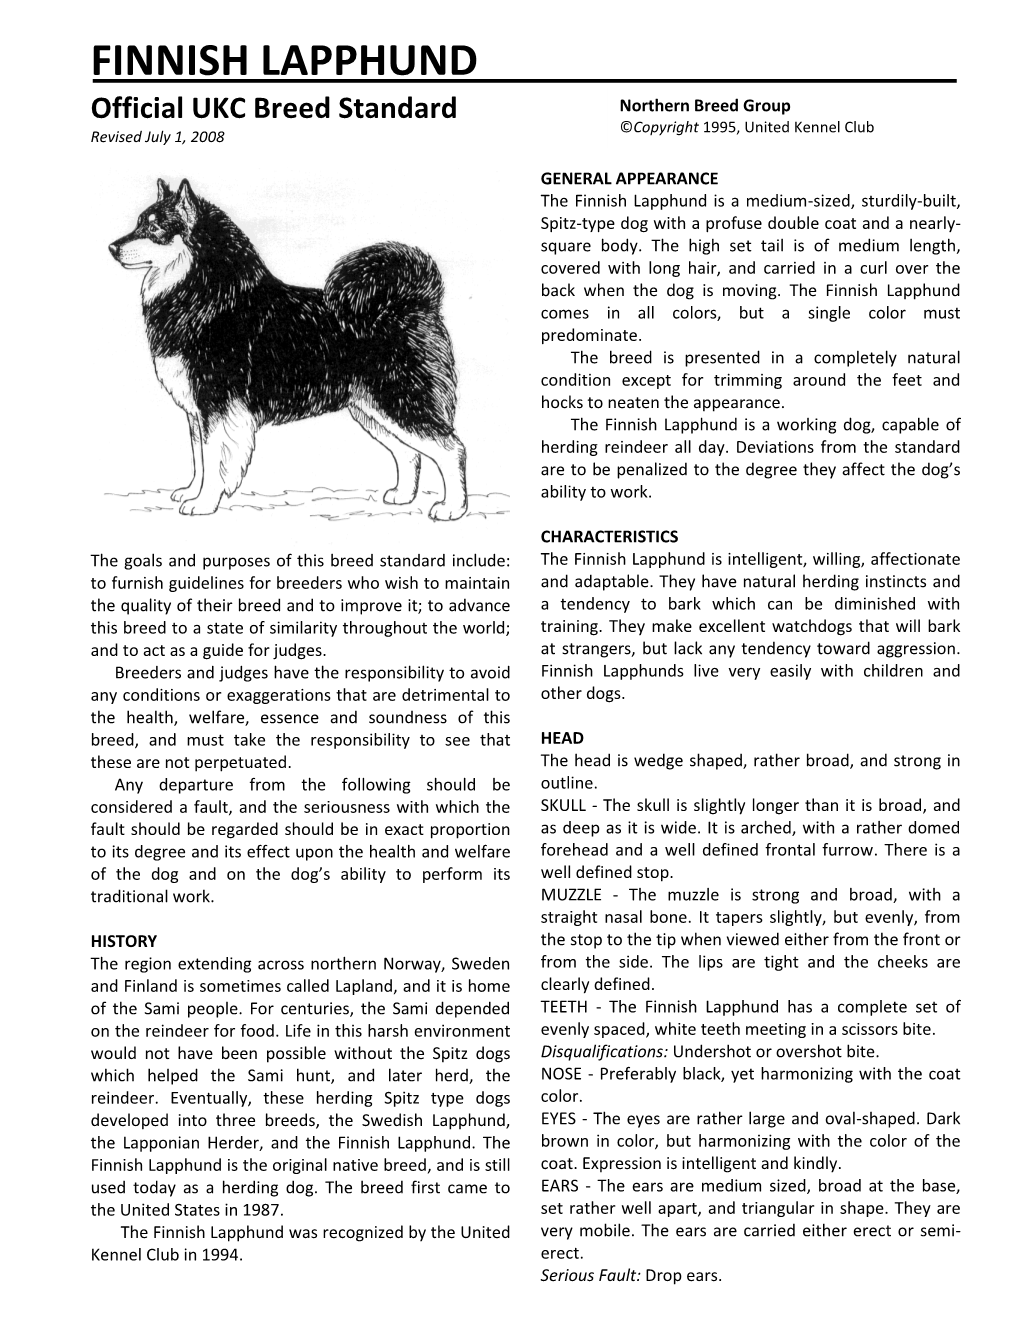 FINNISH LAPPHUND Official UKC Breed Standard Northern Breed Group ©Copyright 1995, United Kennel Club Revised July 1, 2008